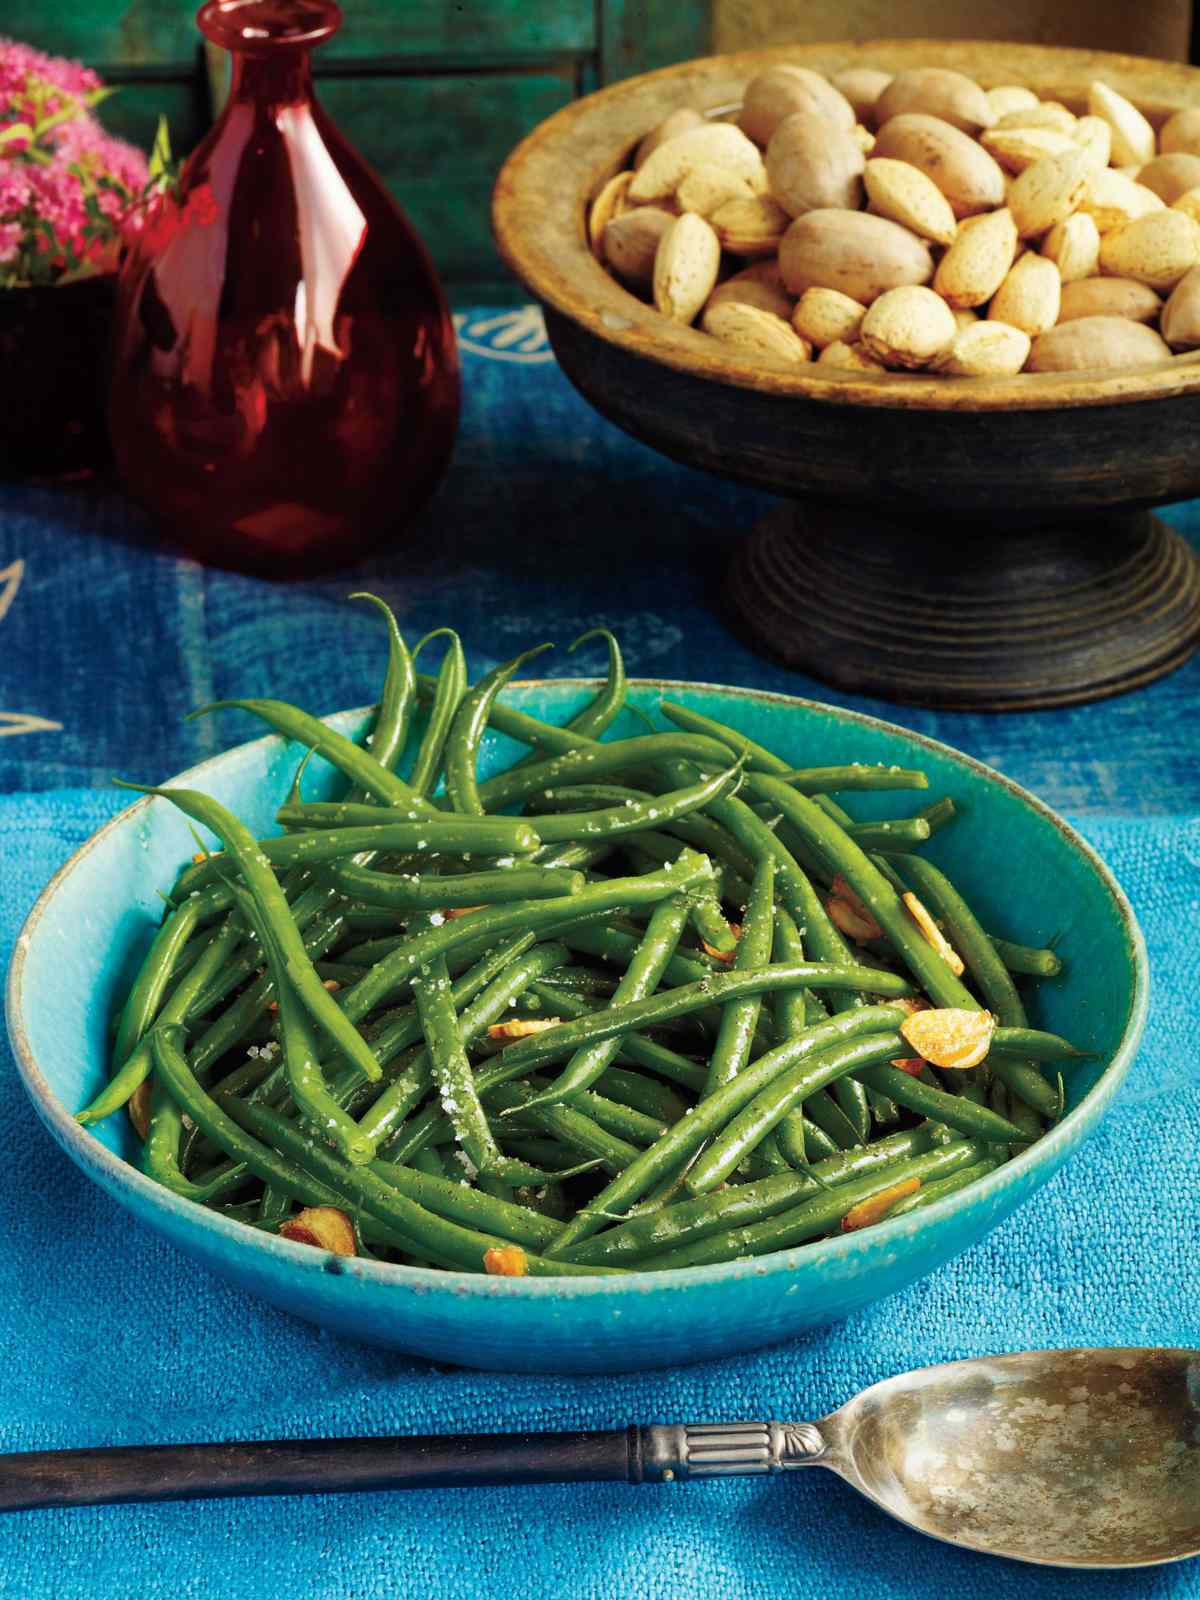 Classic: Green Beans with Garlic